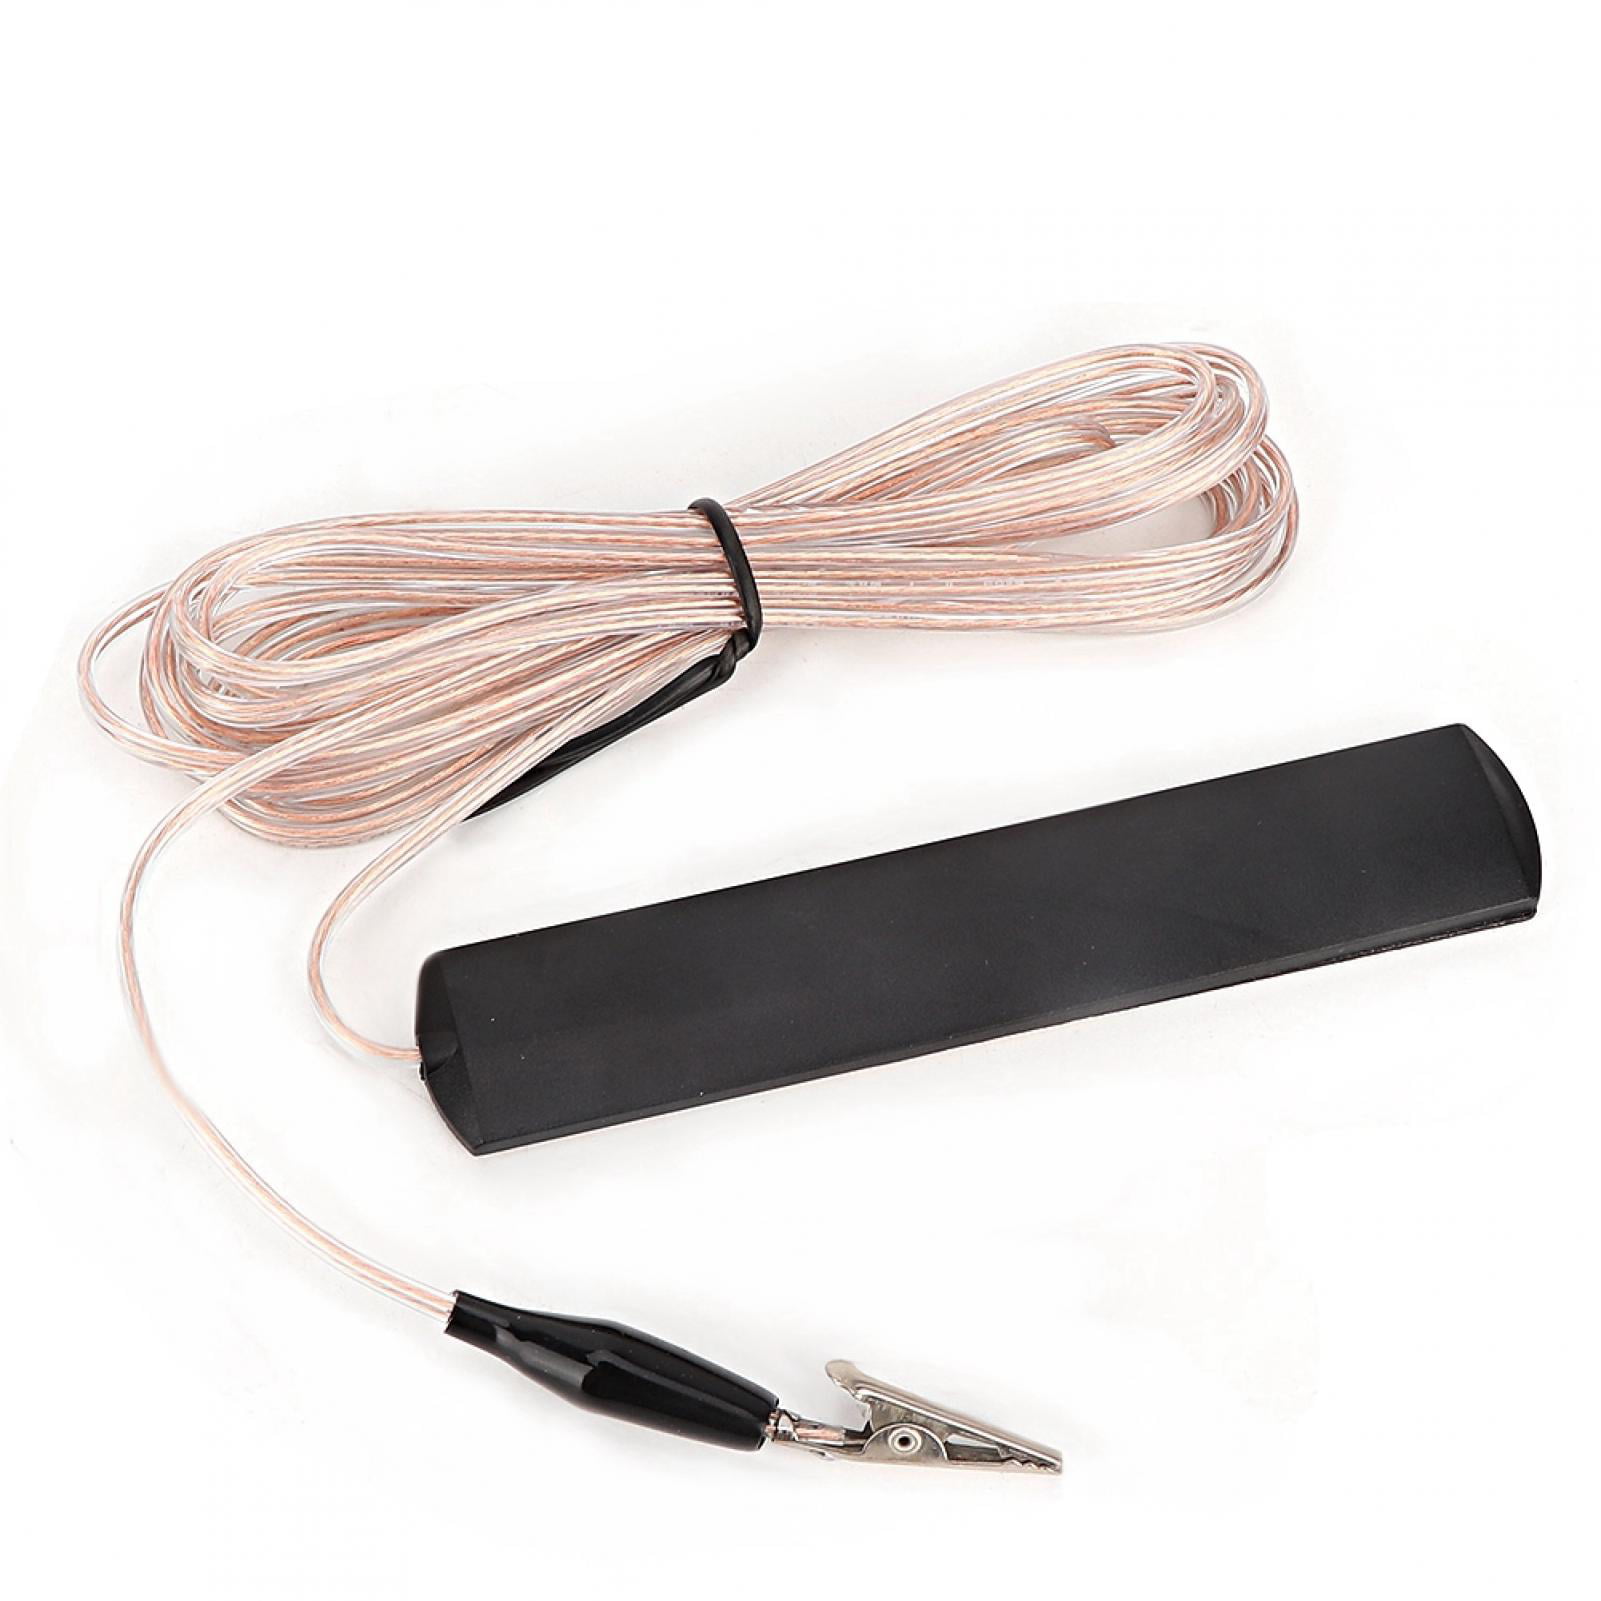 Gupbes ANT-108SE FM Aerial for Indoor Home Audio AV Power Receiver, Home Aerial, Antenna pic